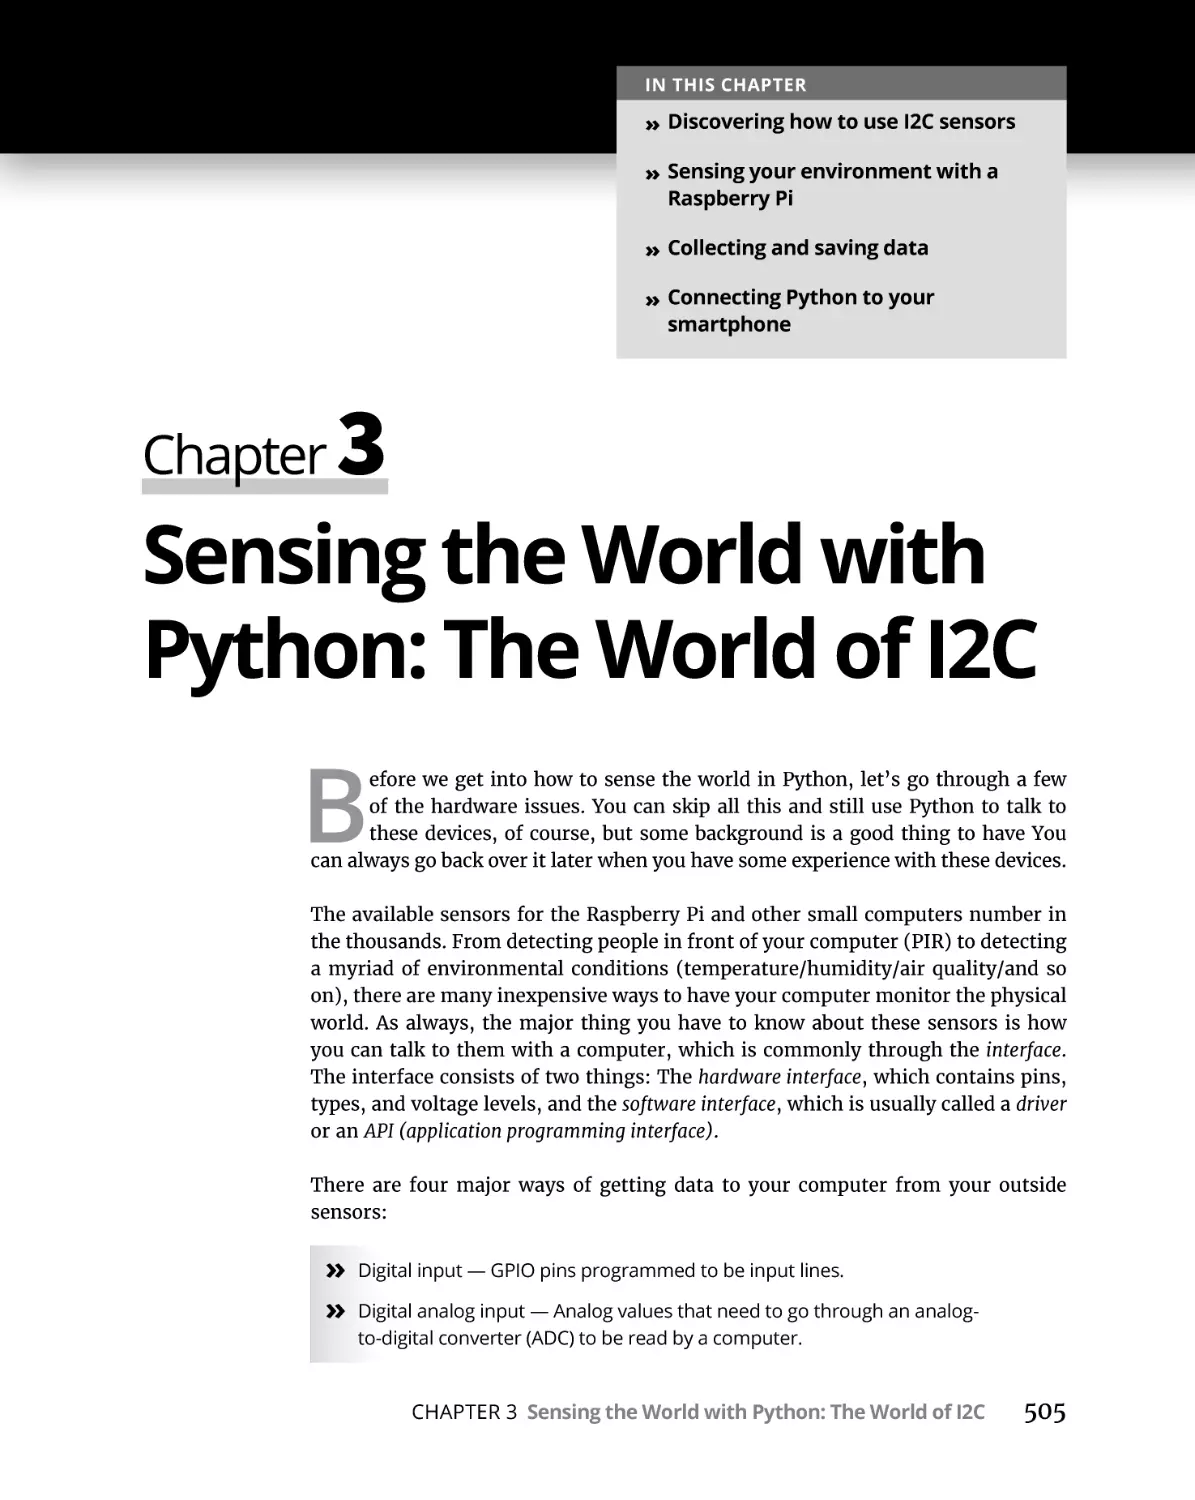 Chapter 3 Sensing the World with Python